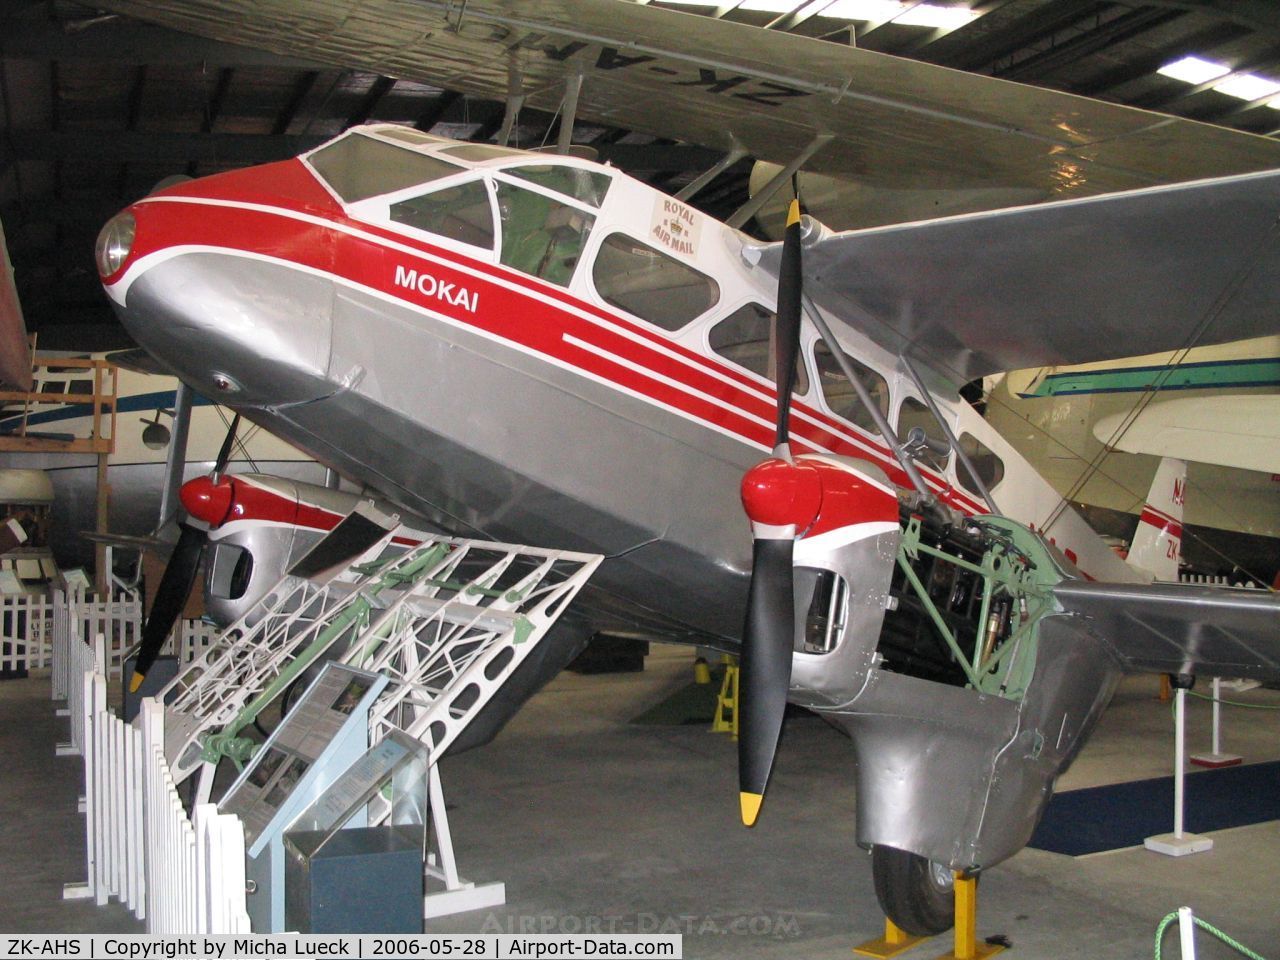 ZK-AHS, De Havilland DH-89A Dragon Rapide C/N 6423, DeHavilland DH89 A Dragon Rapide, preserved at the Museum of Transport and Technology (MOTAT) in Auckland, New Zealand